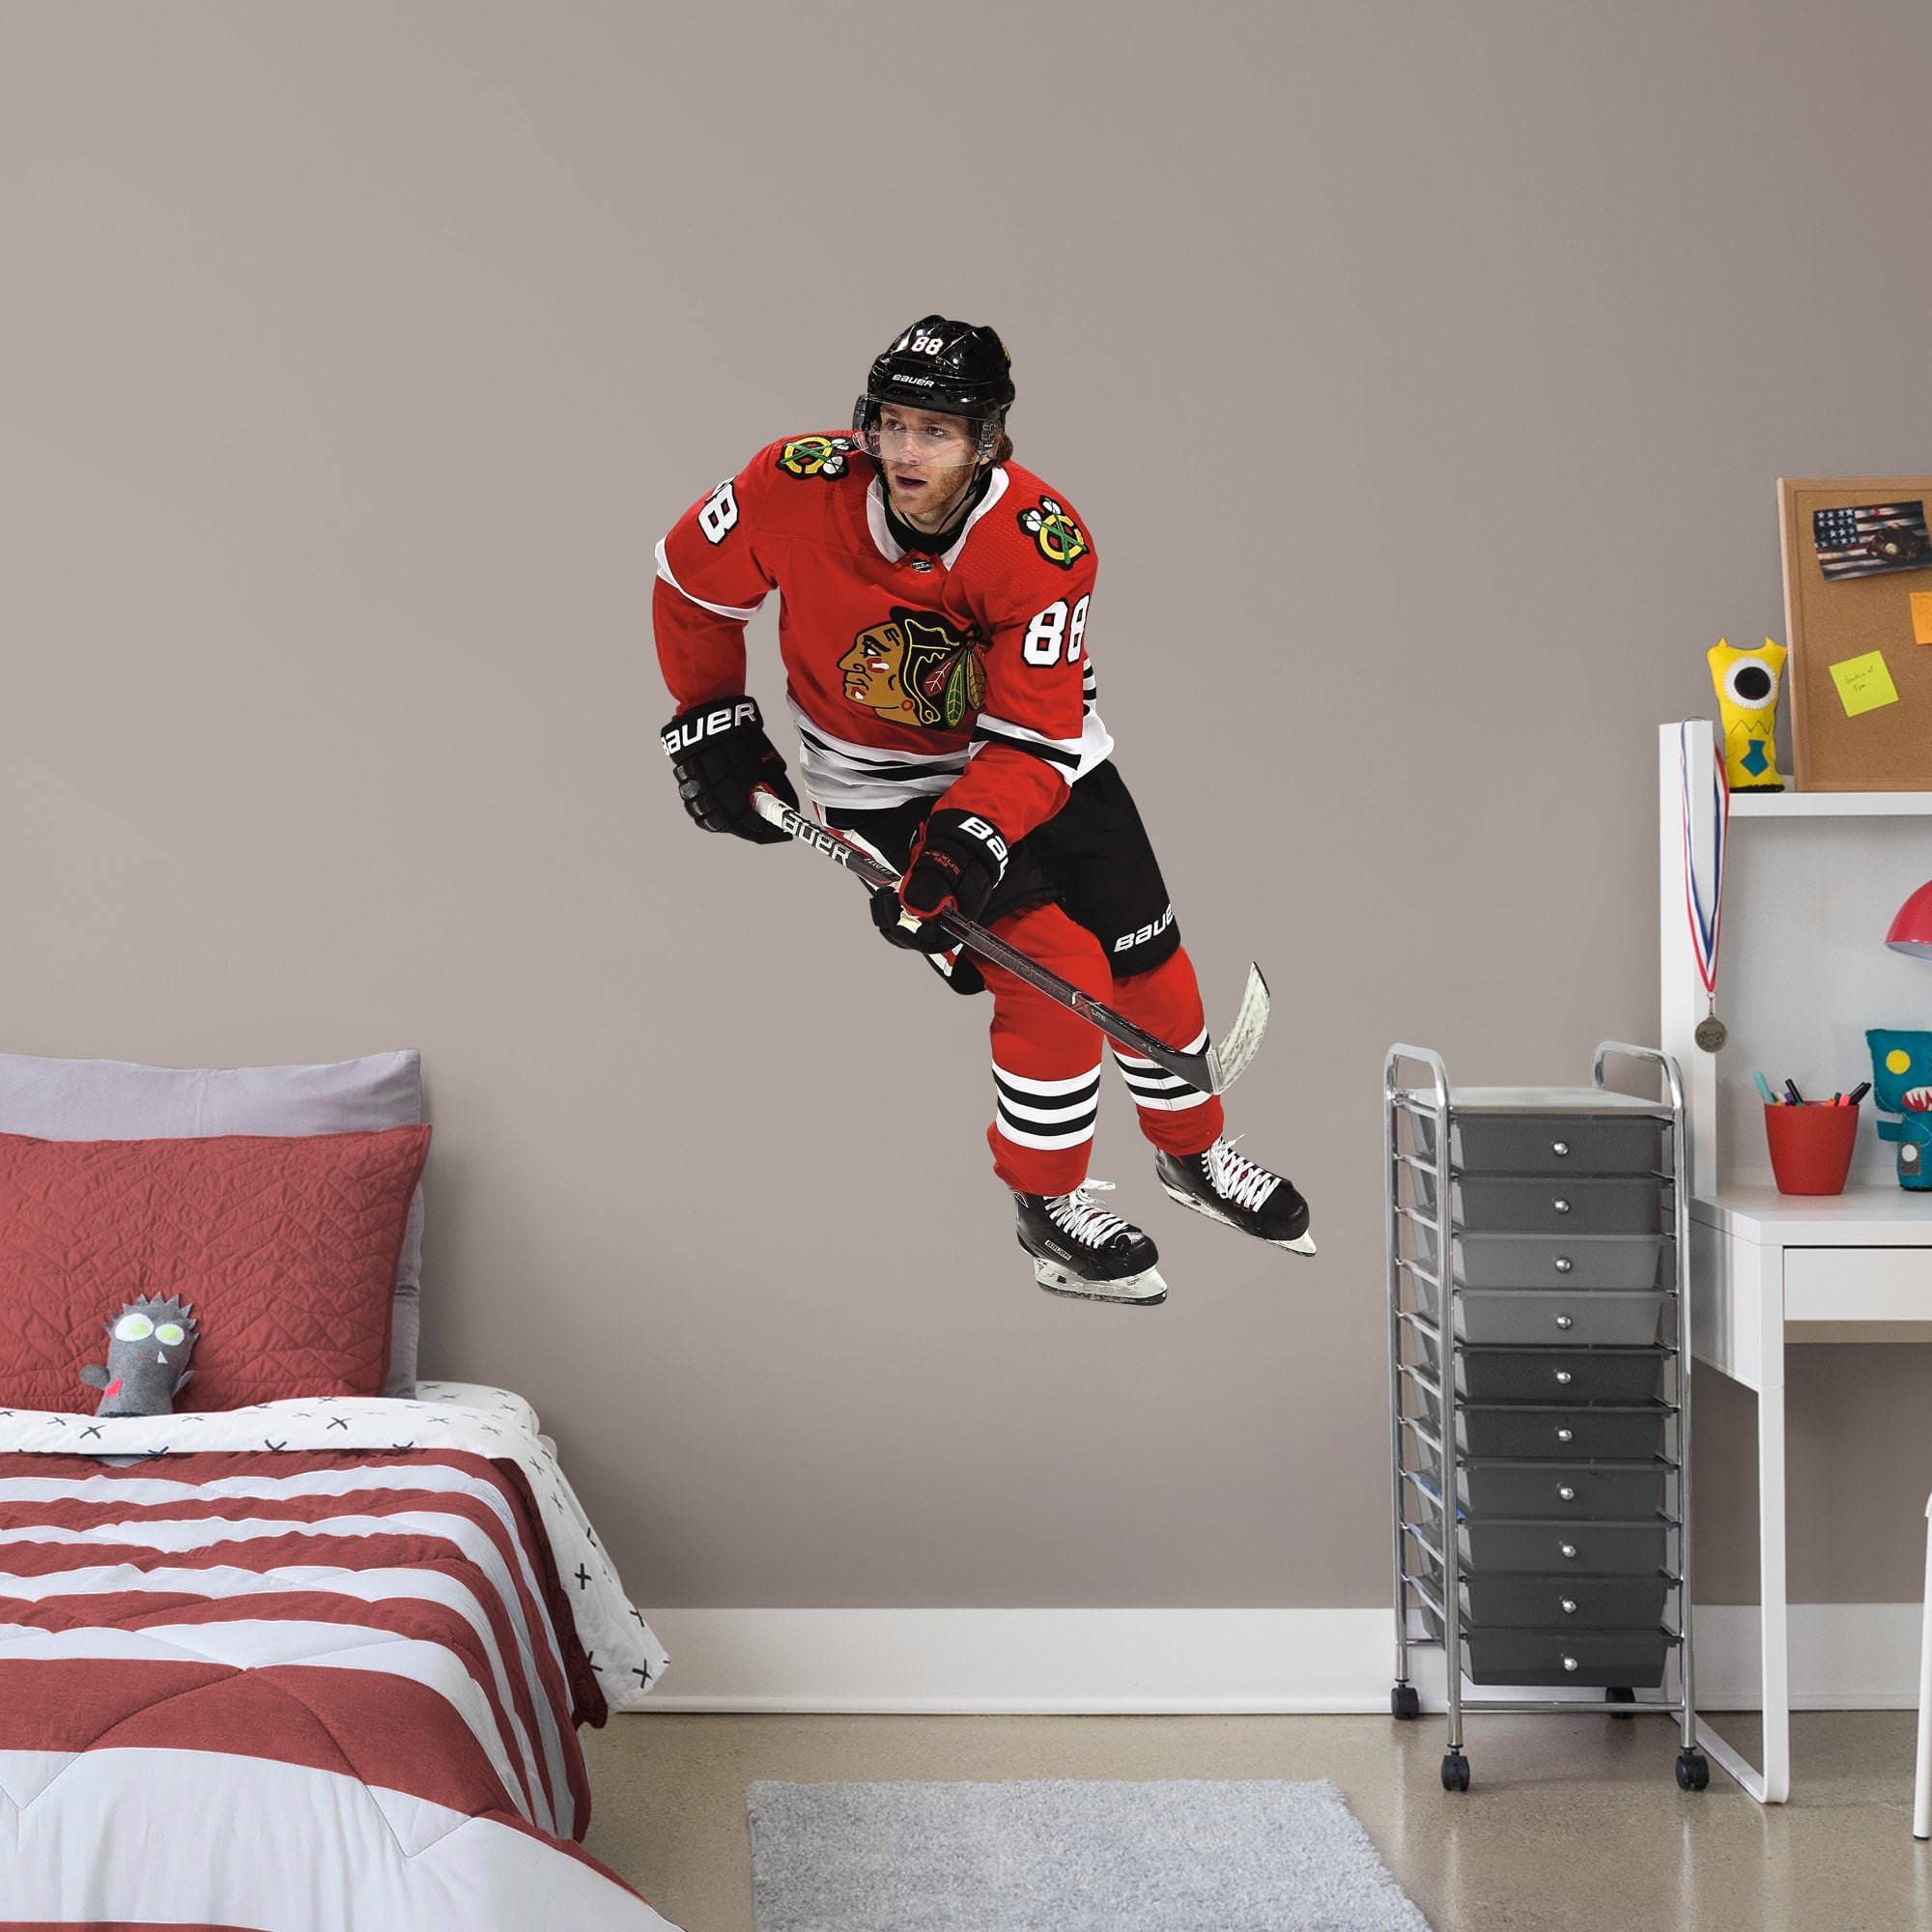 Patrick Kane for Chicago Blackhawks: Home - Officially Licensed NHL Removable Wall Decal Giant Athlete + 2 Decals (34"W x 51"H)